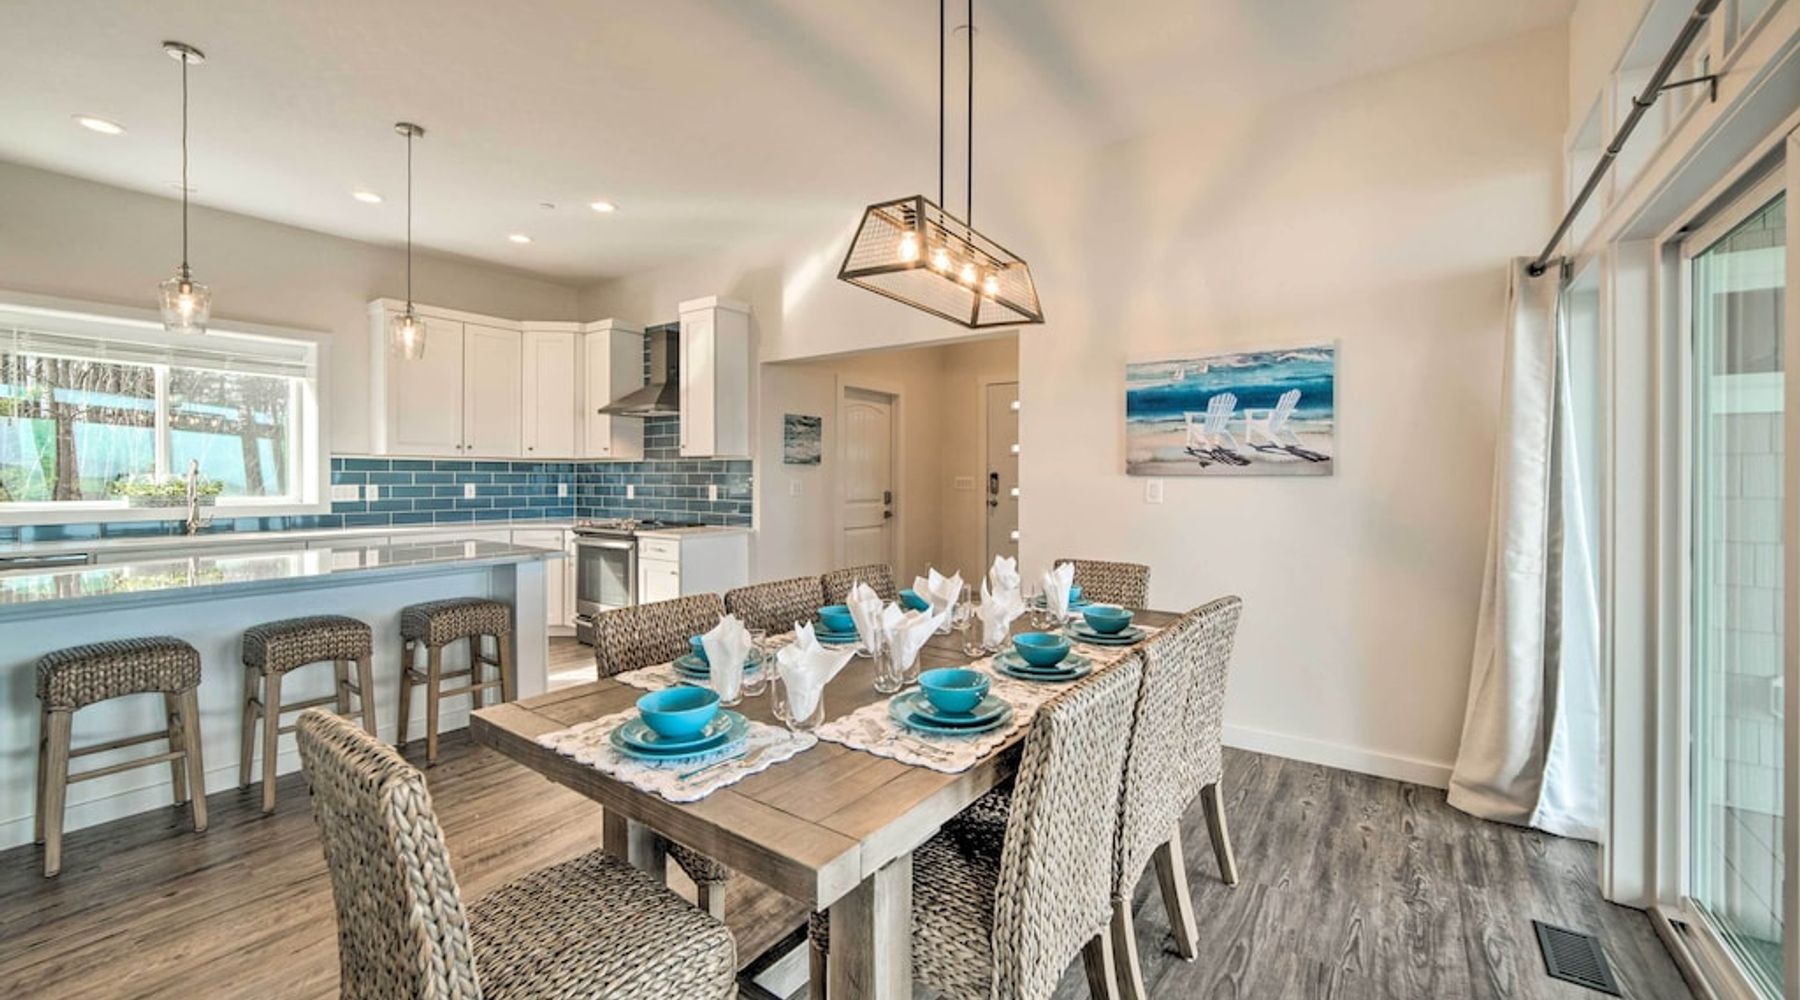 In this 4-bedroom, 4.5-bath house, gather around the table for a spectacular supper!